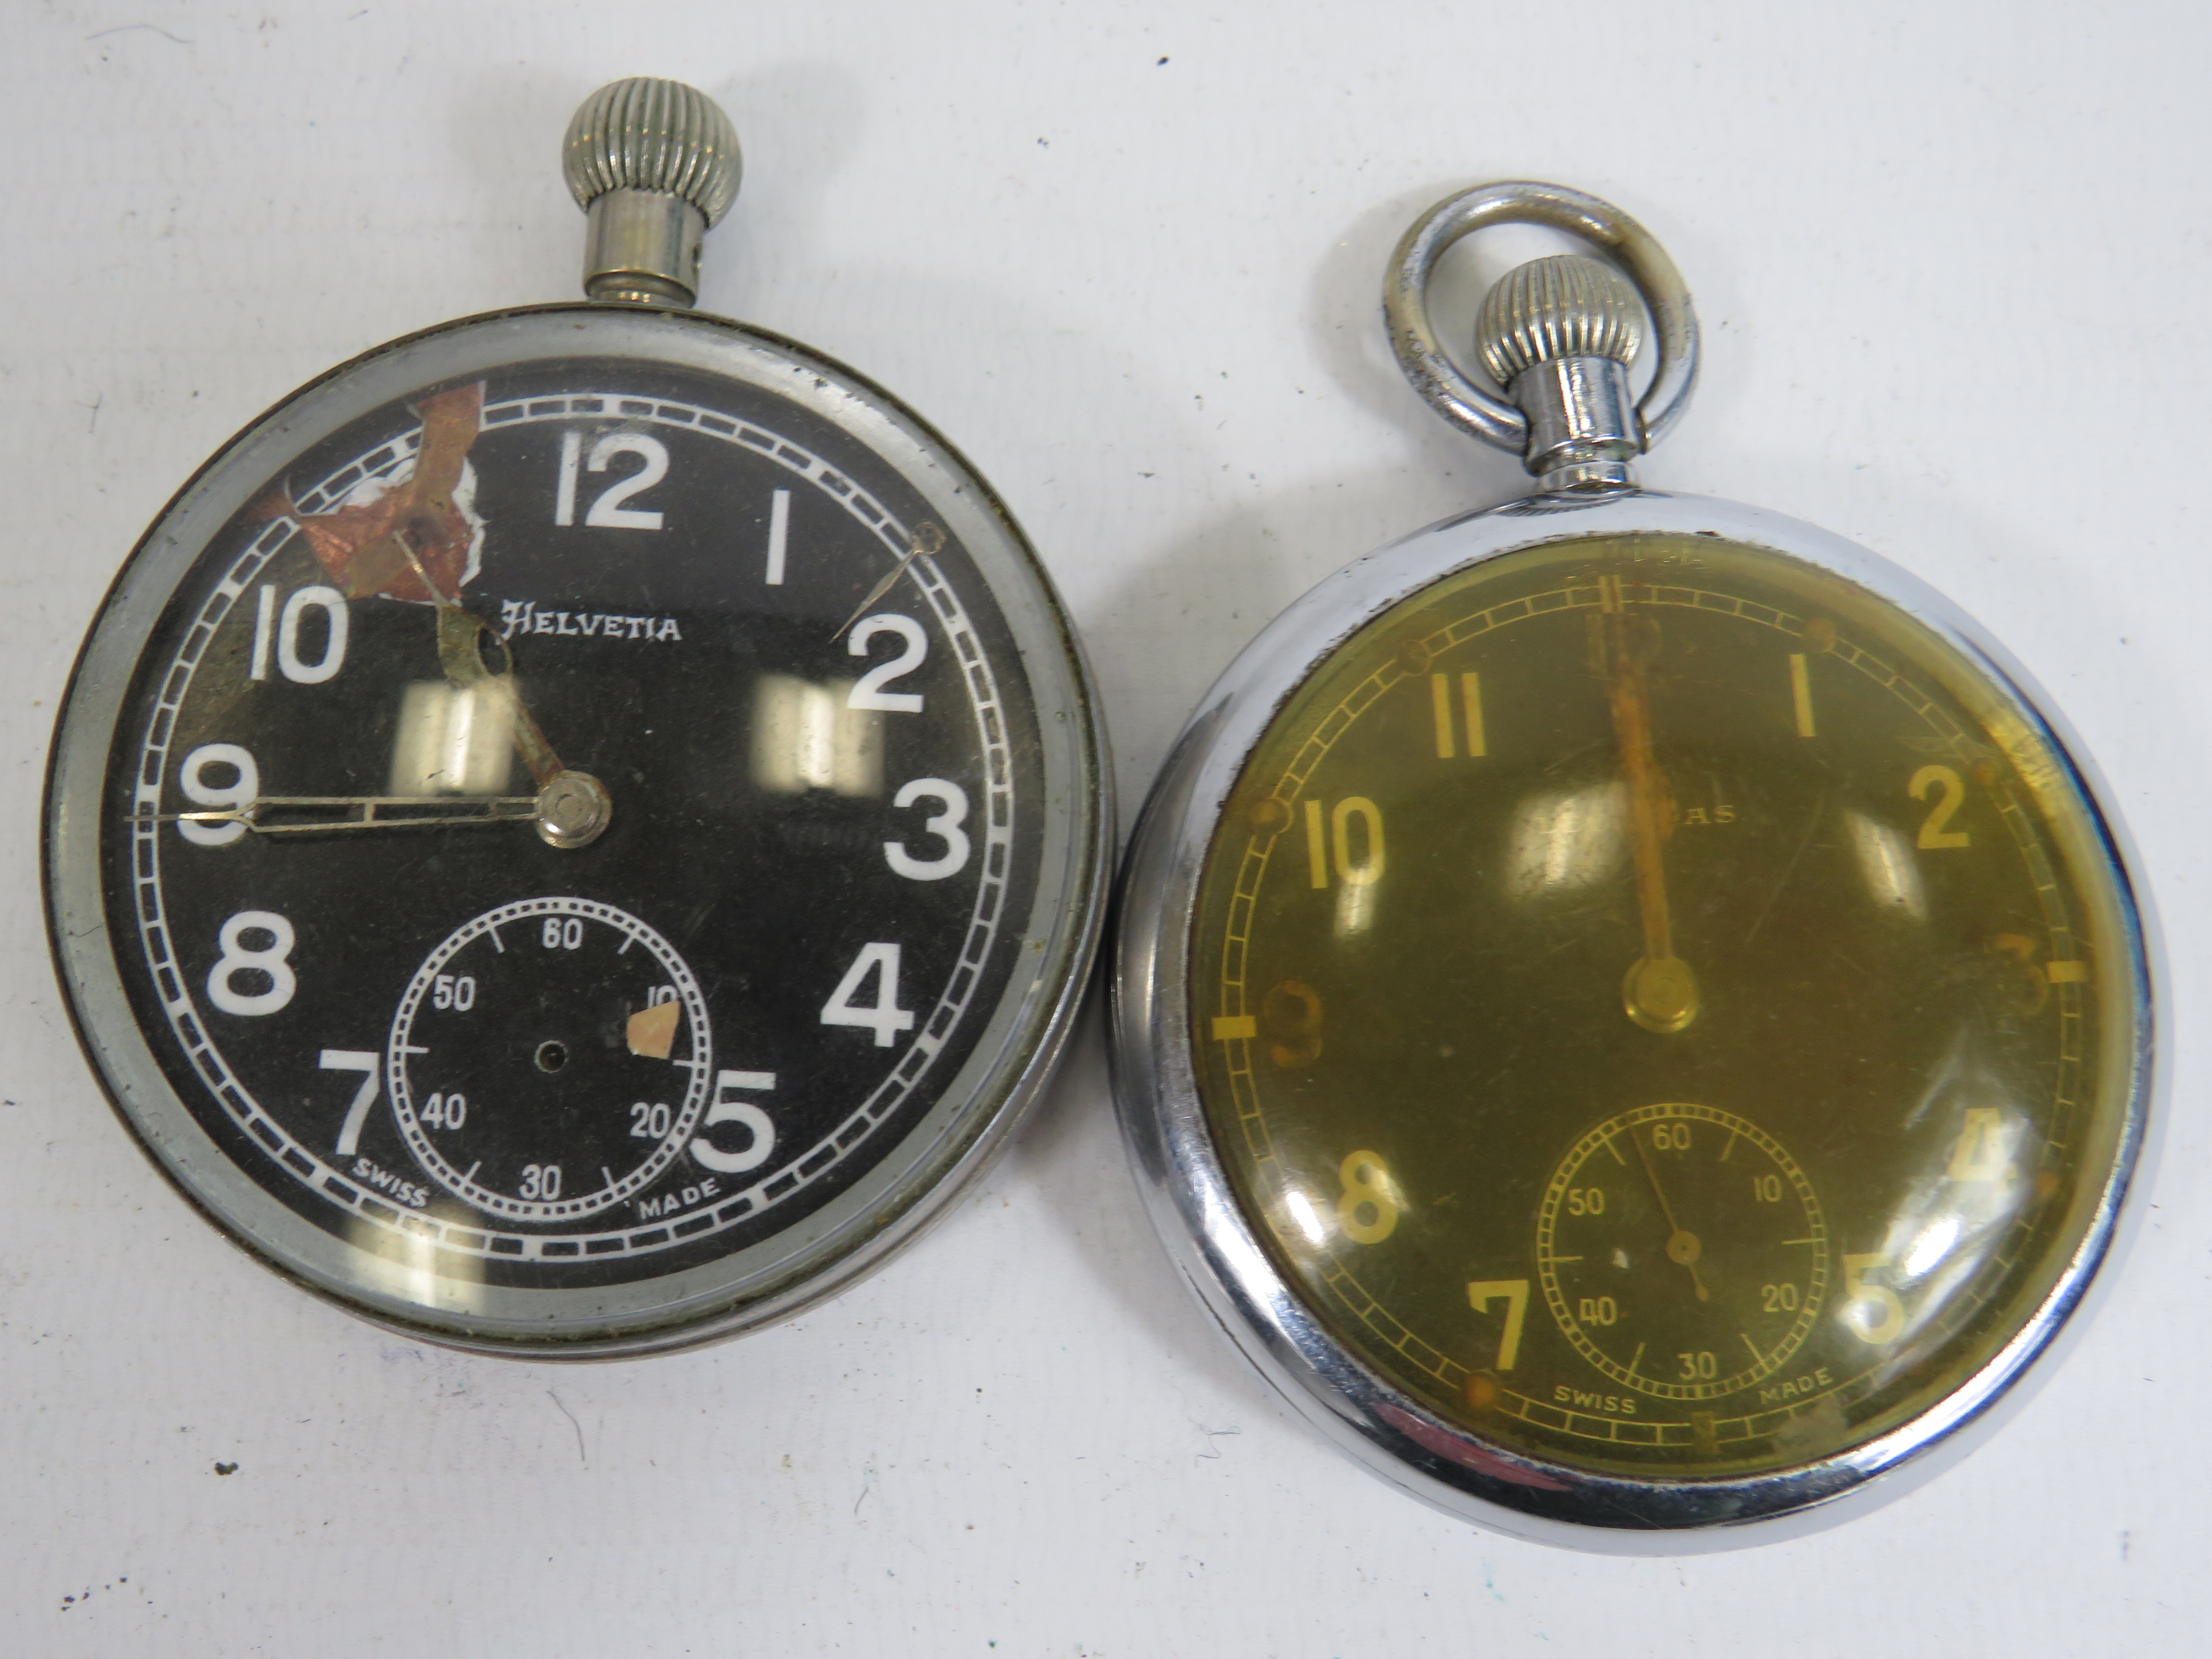 Gents Vintage WWII Era Military Issued Pocket Watches Hand-wind x 2     2114622